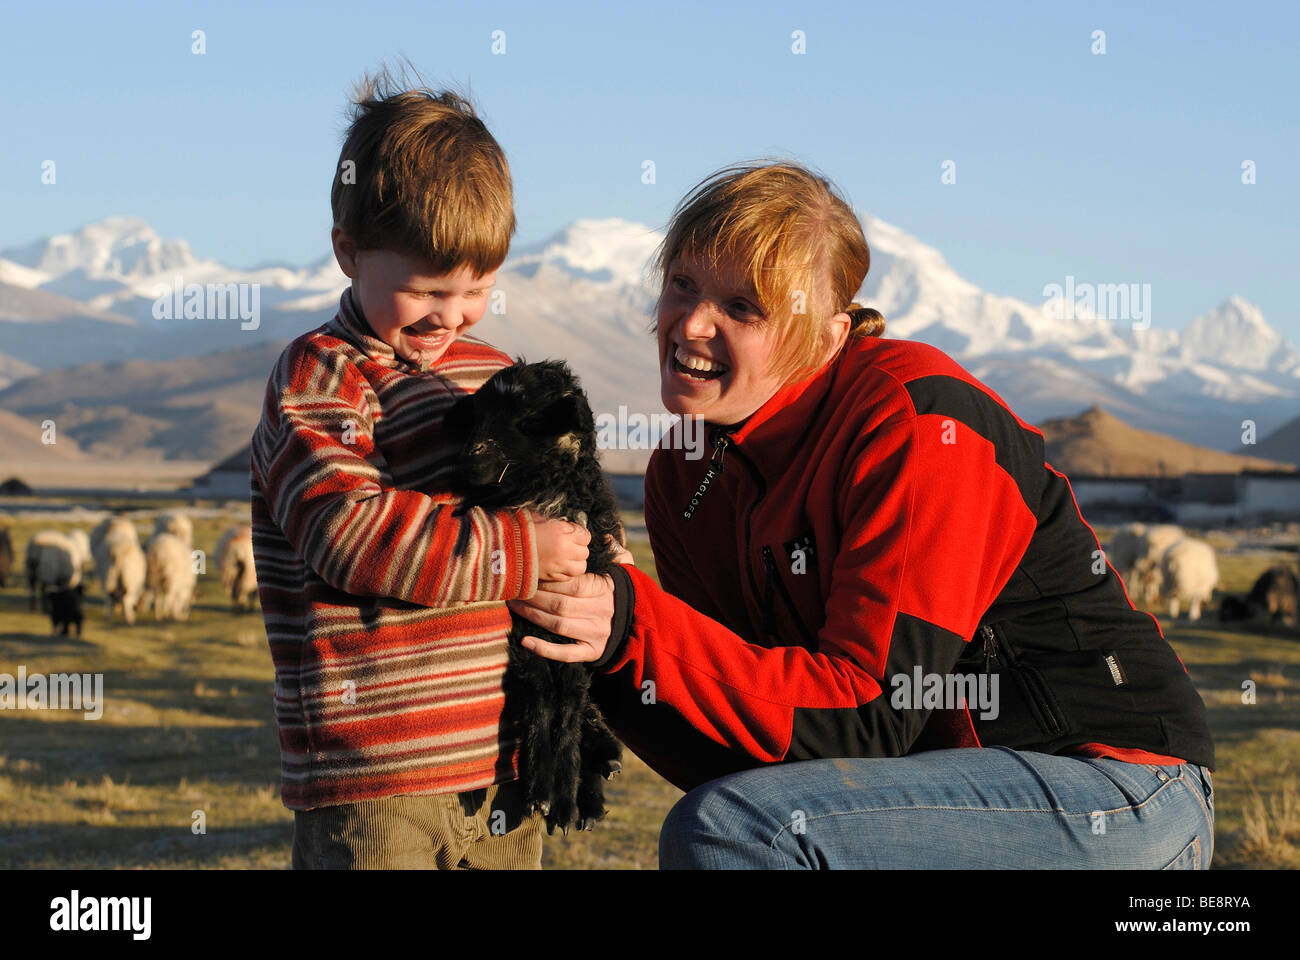 Little girl joyfully holding a little black lamb, alongside a smiling woman in front of the snowy mountains of Cho Oyo, 8112 m, Stock Photo